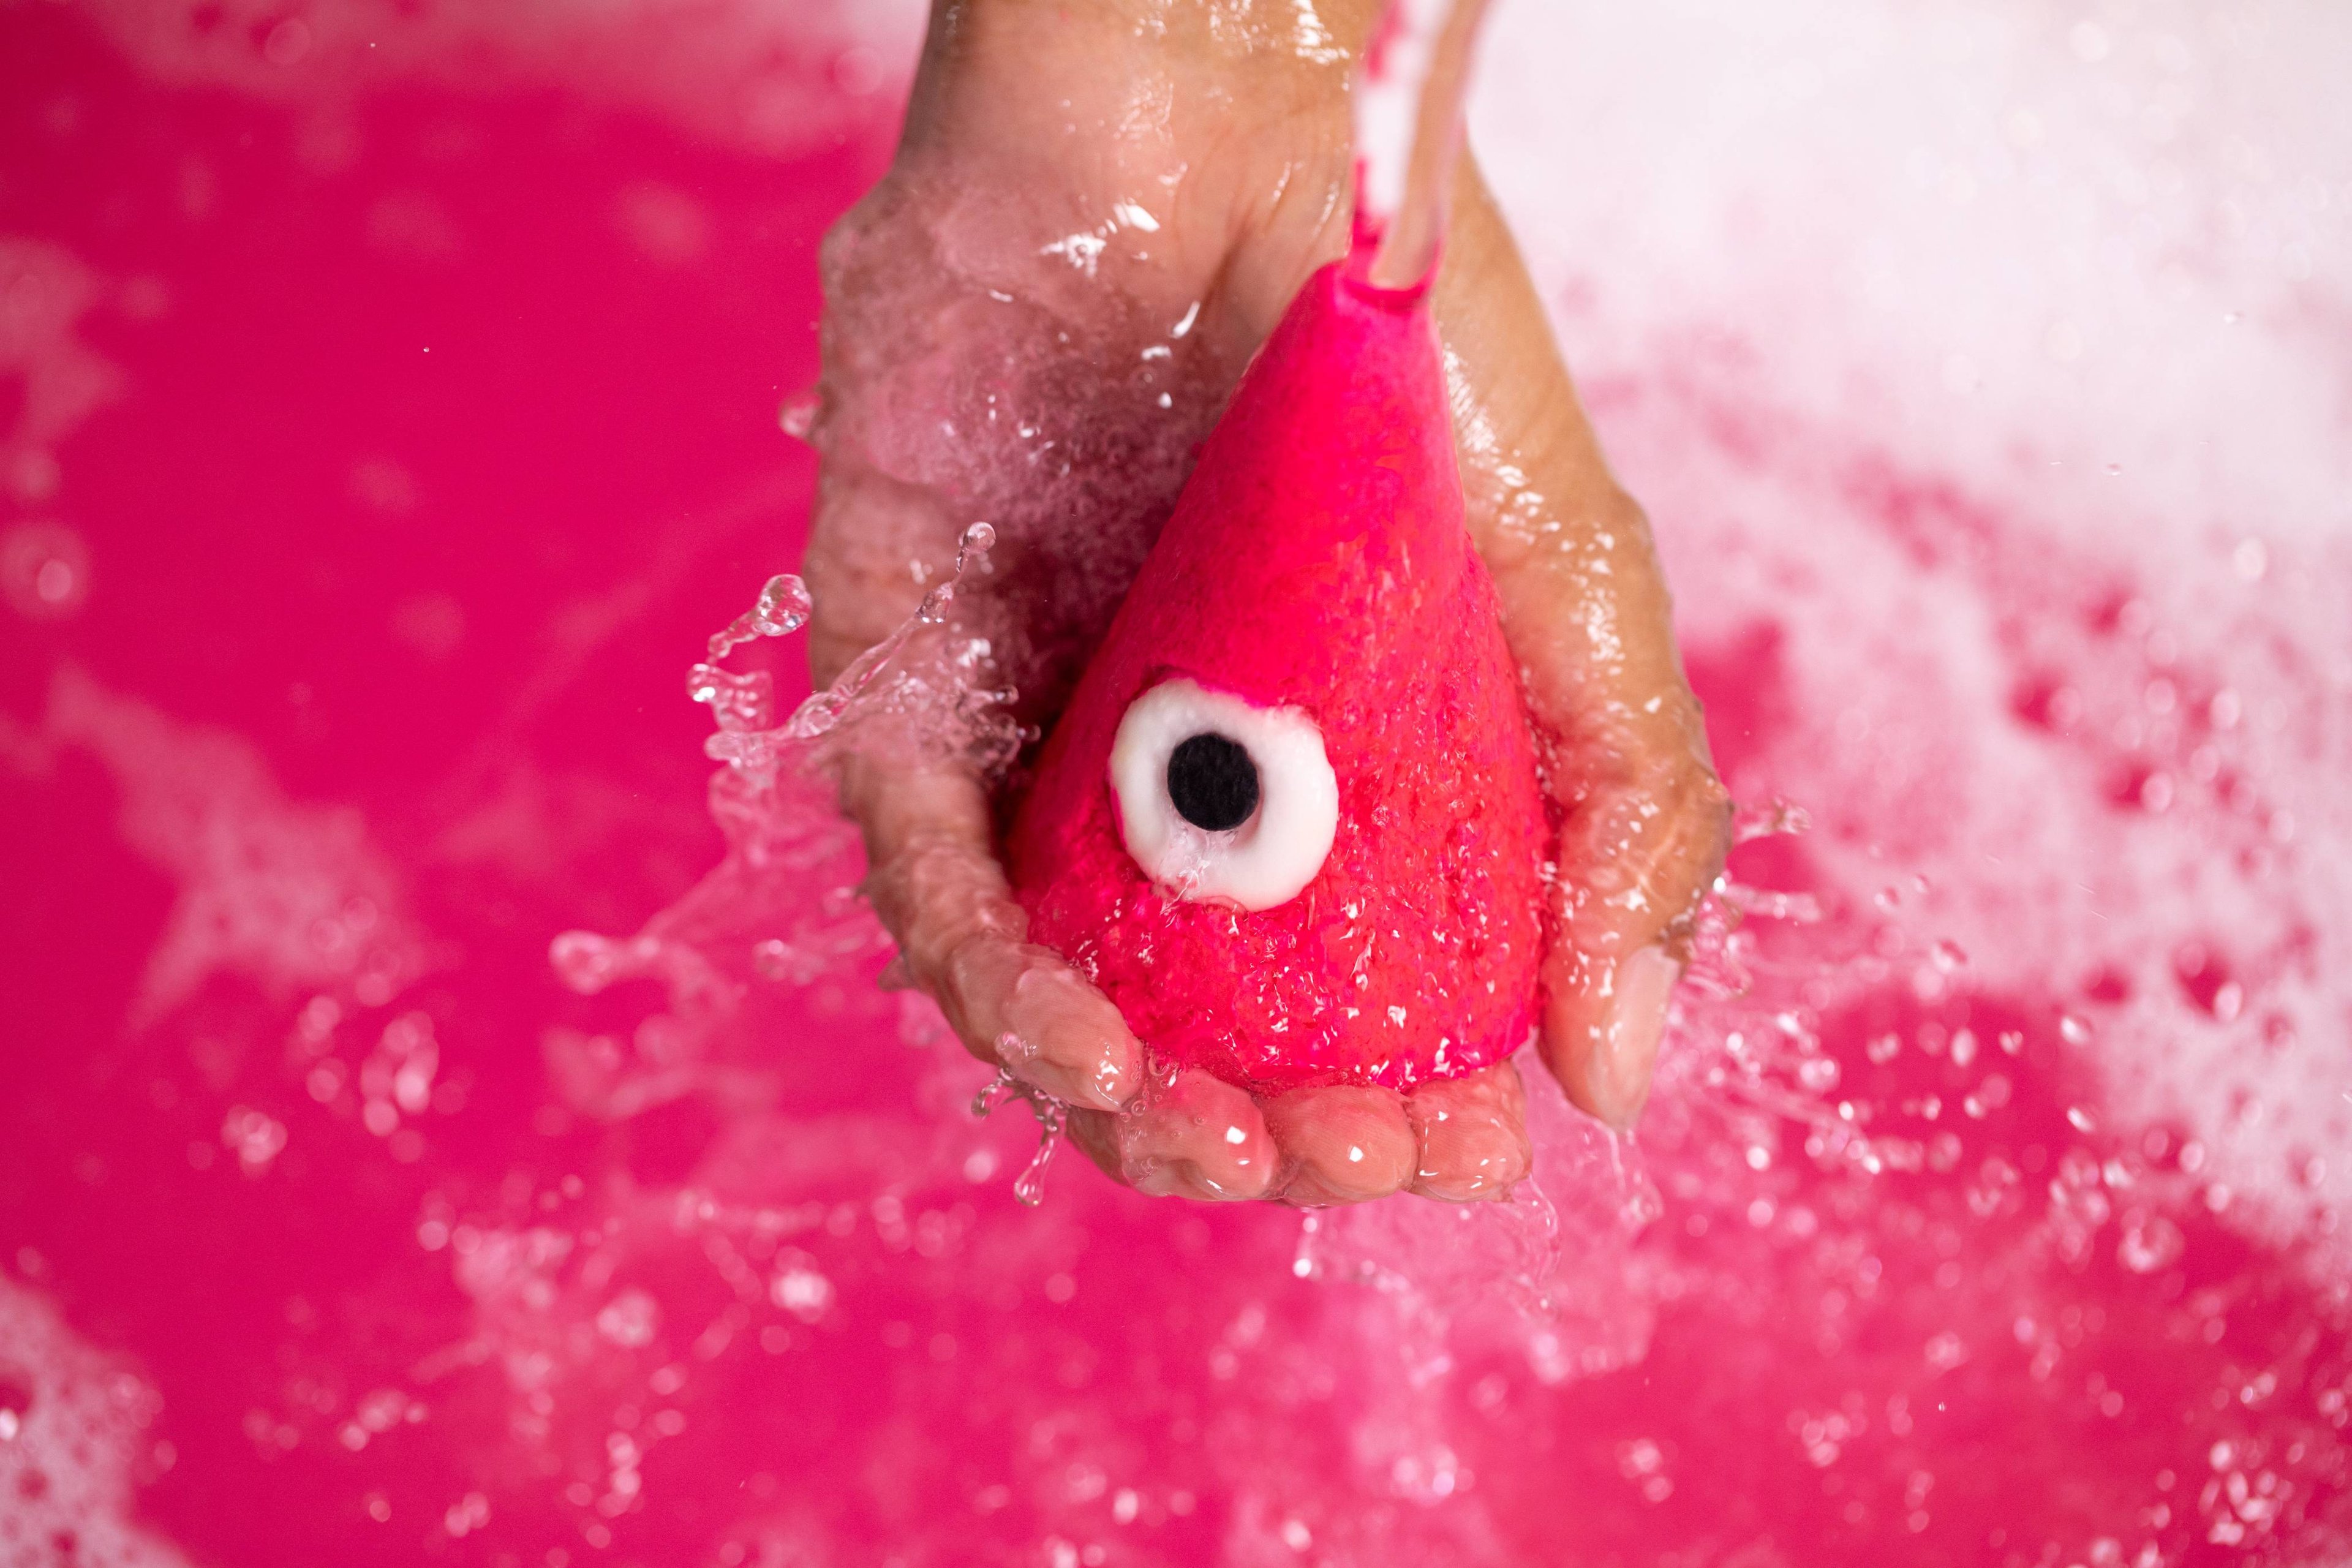 A hand holds the bubble bar under running water, lots of bubbles foam below on top of pink bath water.